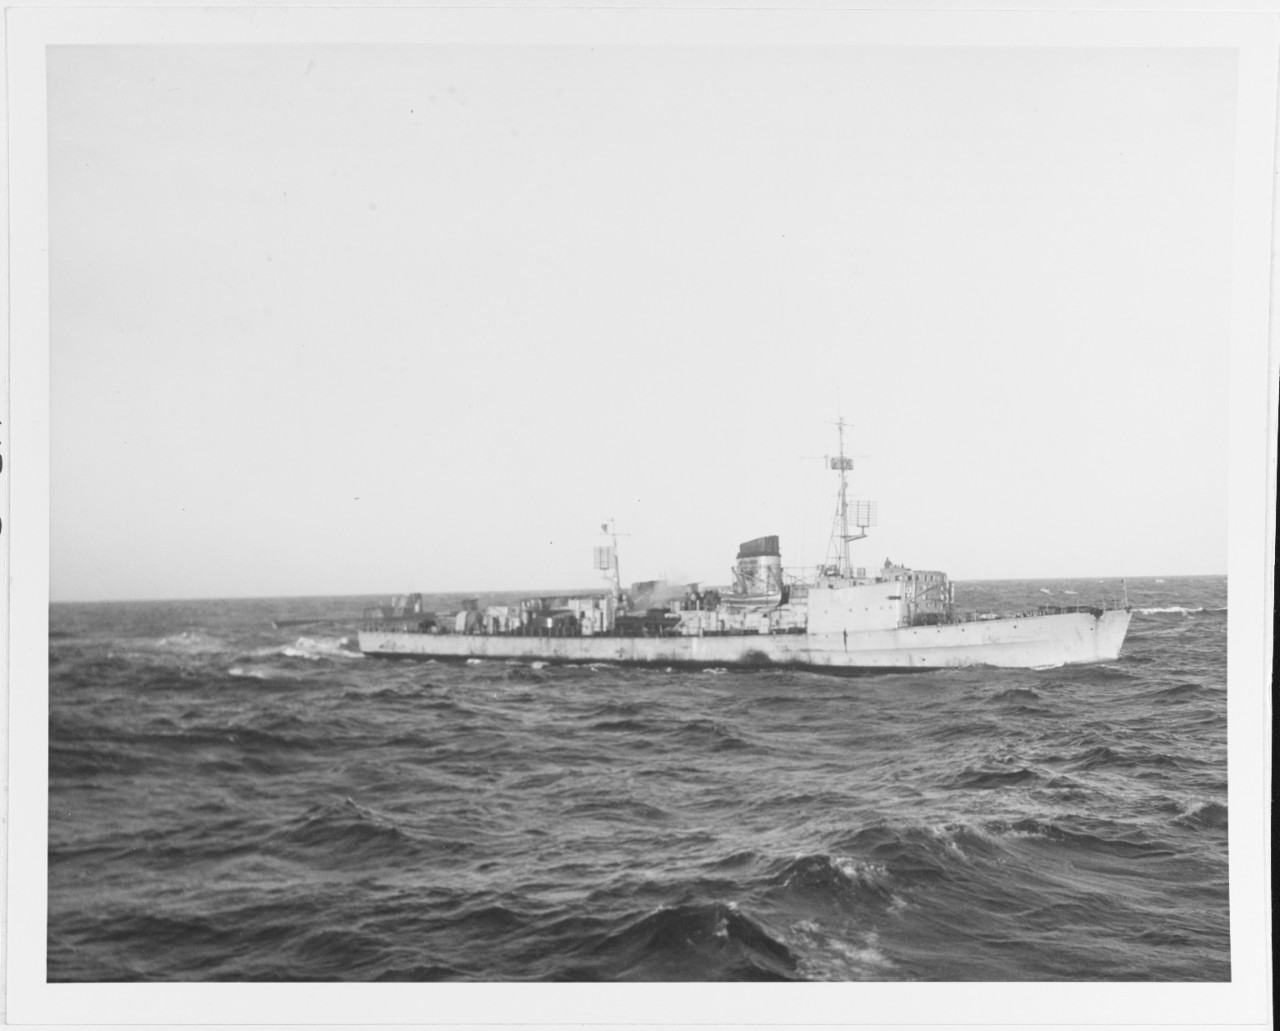 German Torpedo Boat (Probably T-21) at sea, July 2, 1946, to be scuttled in the North Sea with a load of German poison gas